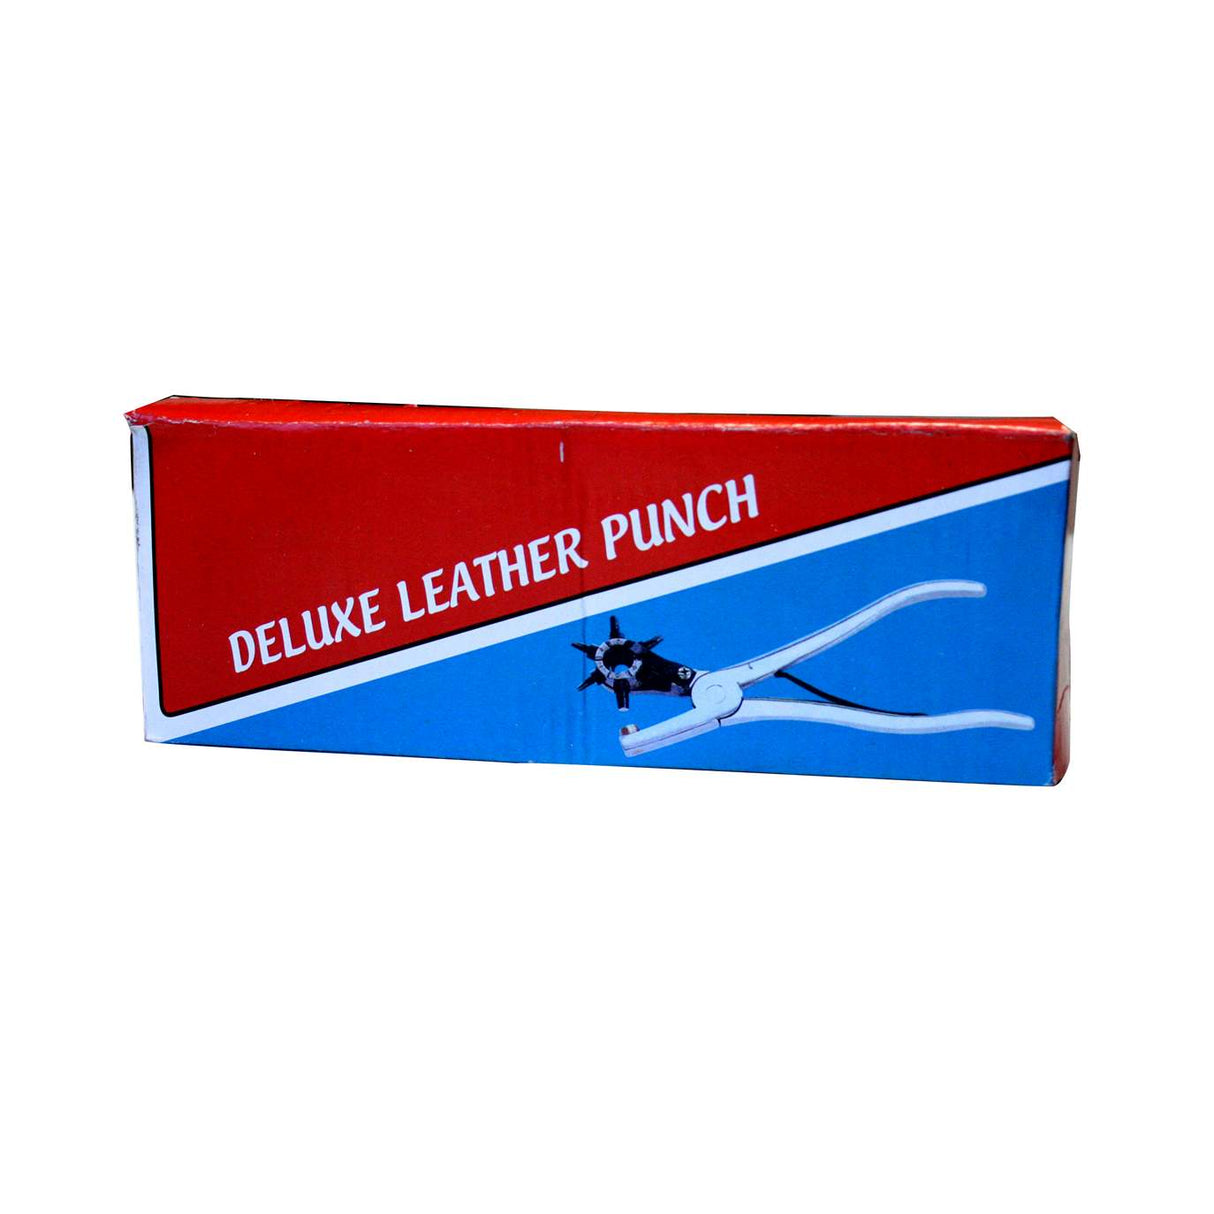 Deluxe Leather Punch